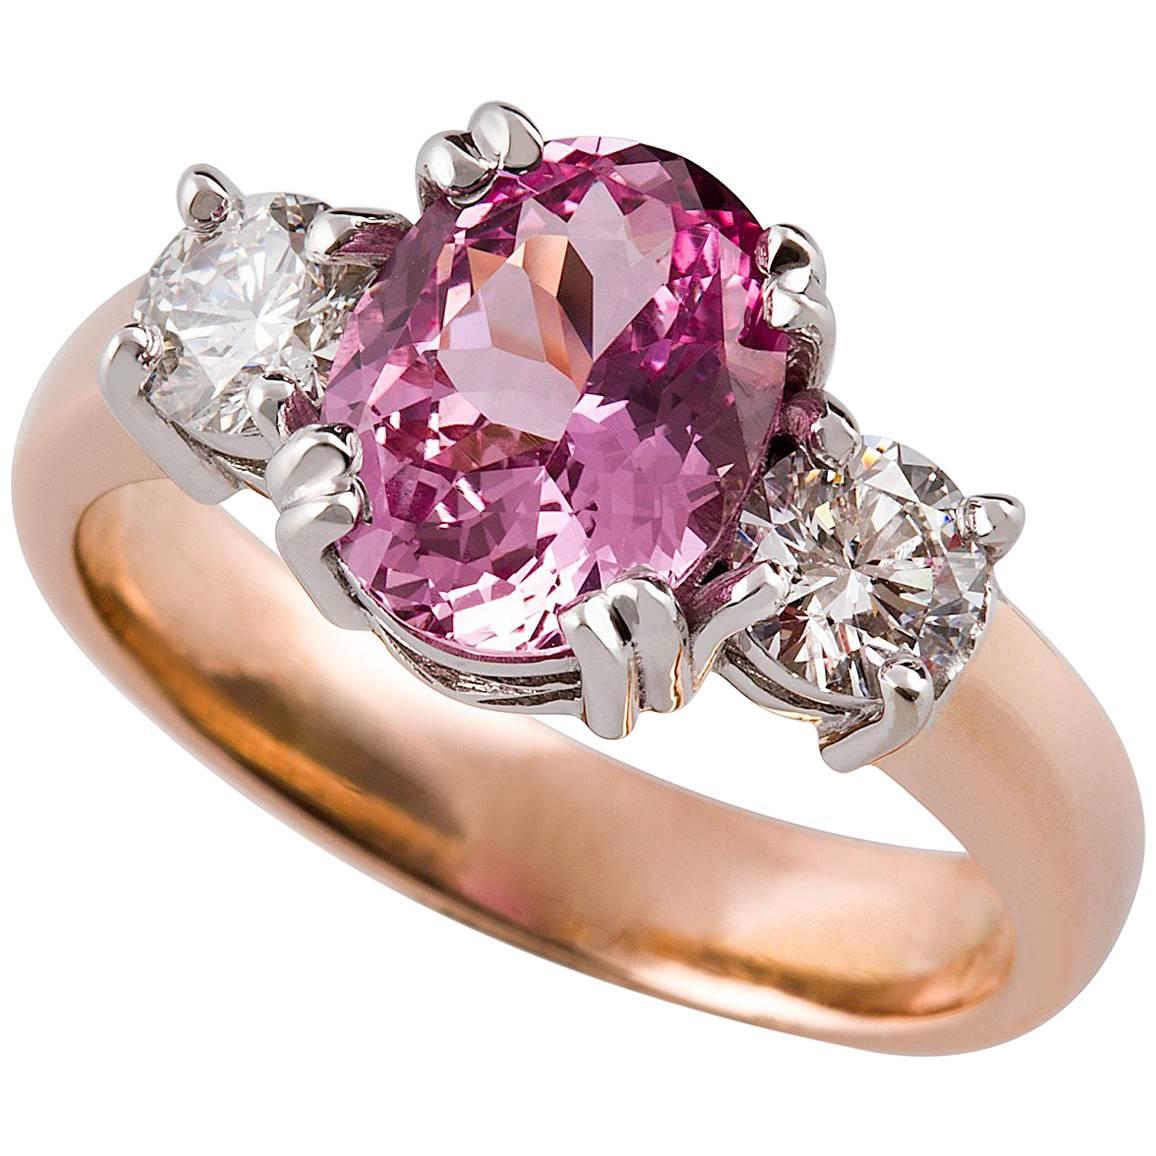 Rosa Zaffiro Ring

This gorgeous heirloom style 18ct rose gold ring is set with a stunning pink sapphire and pair of white diamonds in 18ct white gold settings.

Oval cut sapphire: intense medium pink colour, 9.05 x 7.08 x 4.29mm, 2.23ct, please